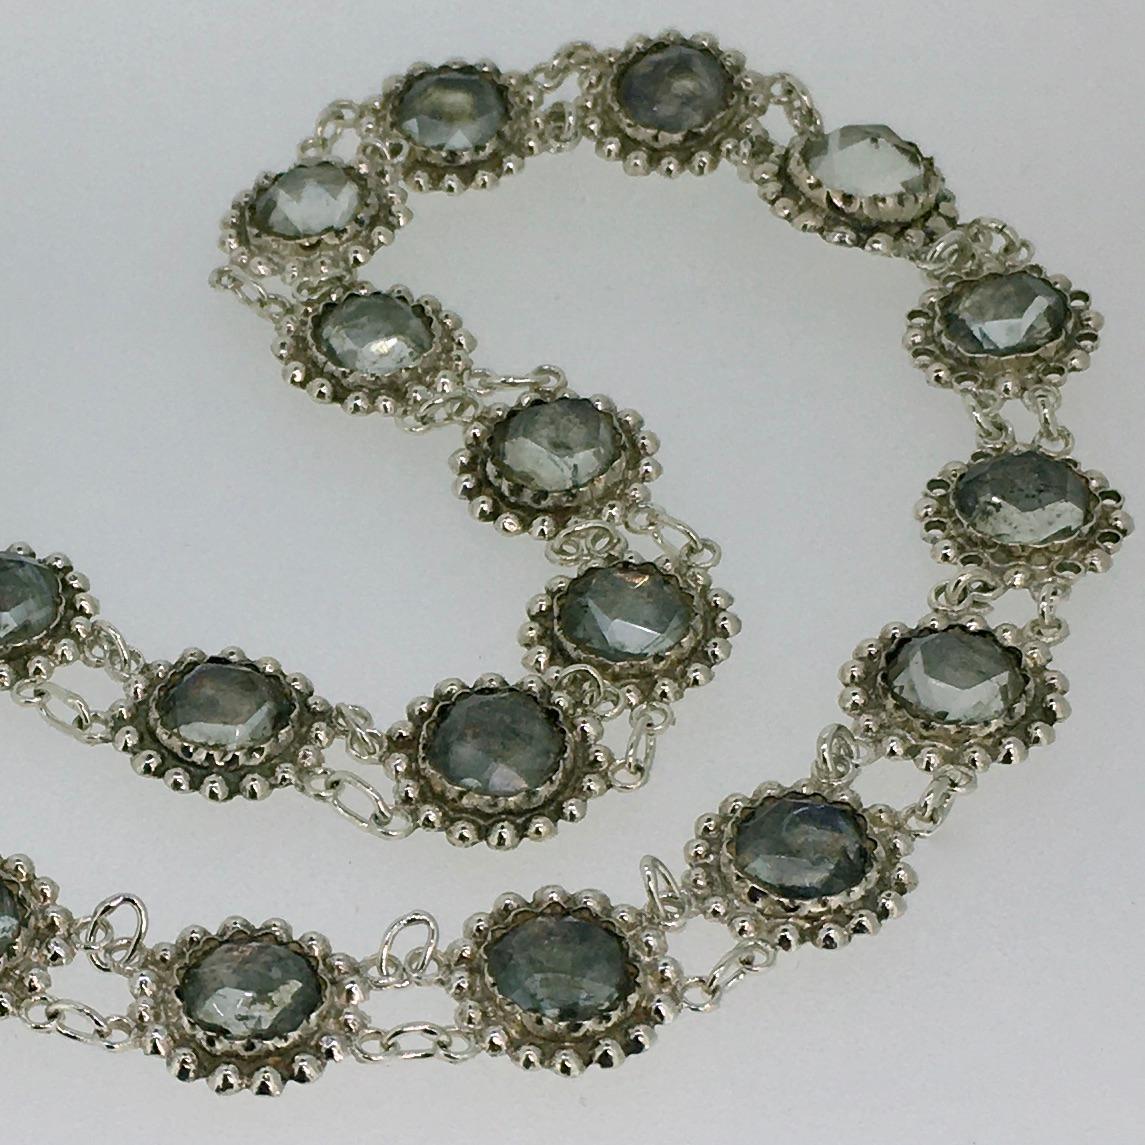 Silver Necklace, set with rose cut Rhinestones, 27 links, integrated lock.

This antique necklace consists of 26 rosette-shaped links set with rose-cut rock crystals. The closure is also completely authentic, which is rare itself.
The colors of the